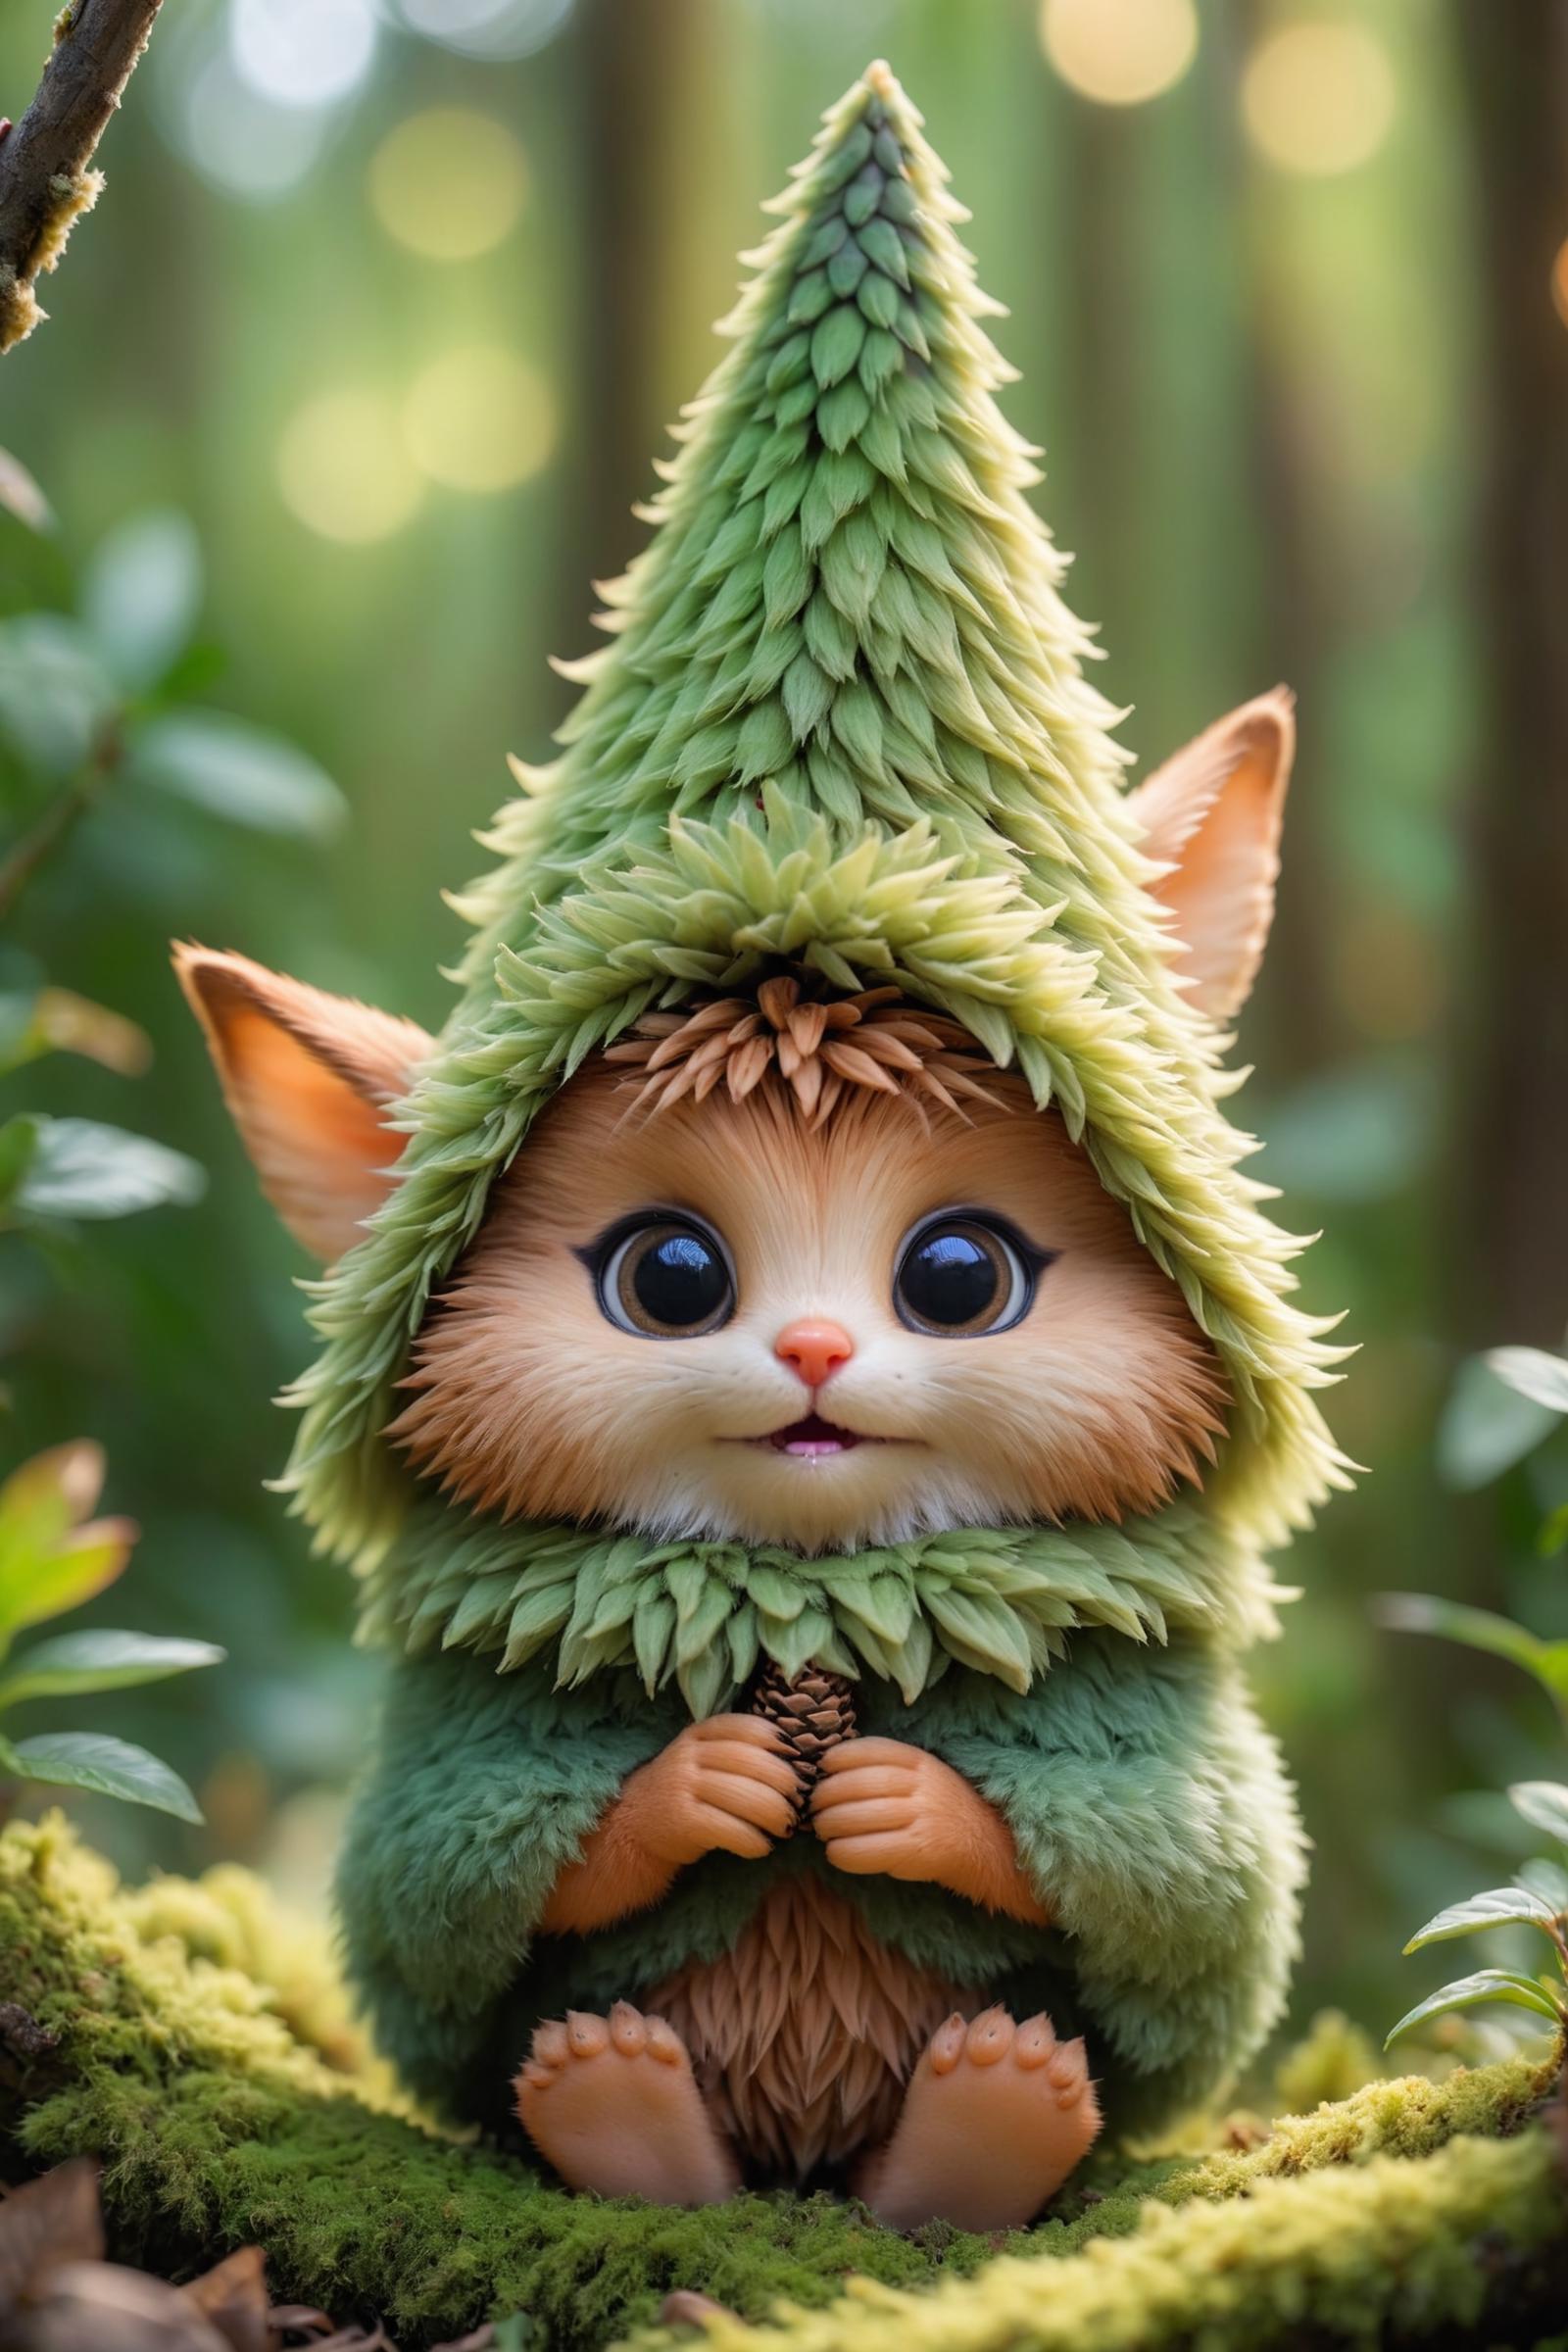 A cute furry creature wearing a green jacket and hat.